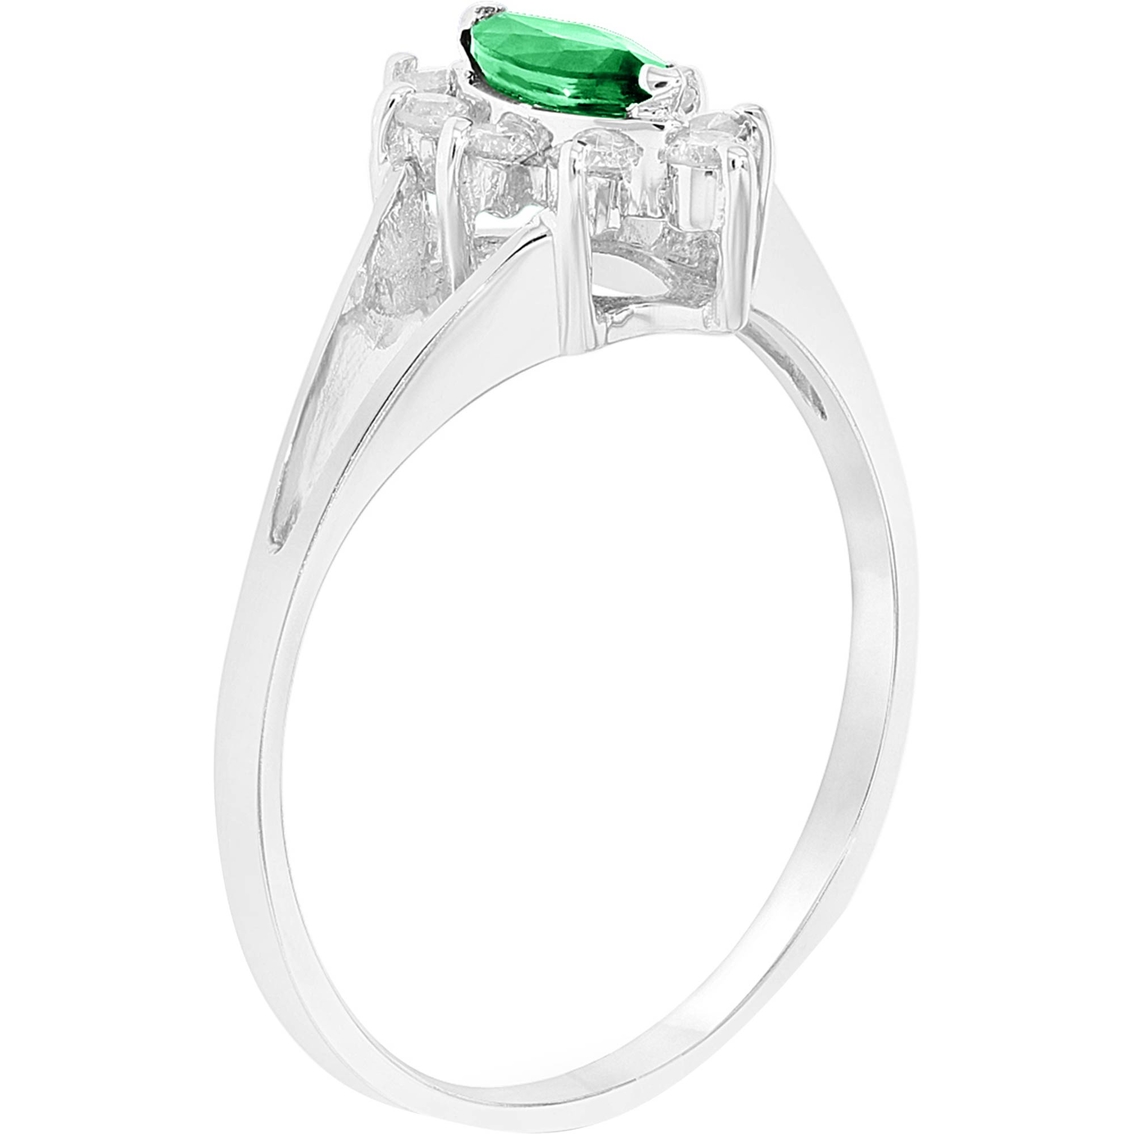 14k White Gold Diamond And 6x3mm Marquis Shaped Emerald Ring | Gemstone ...